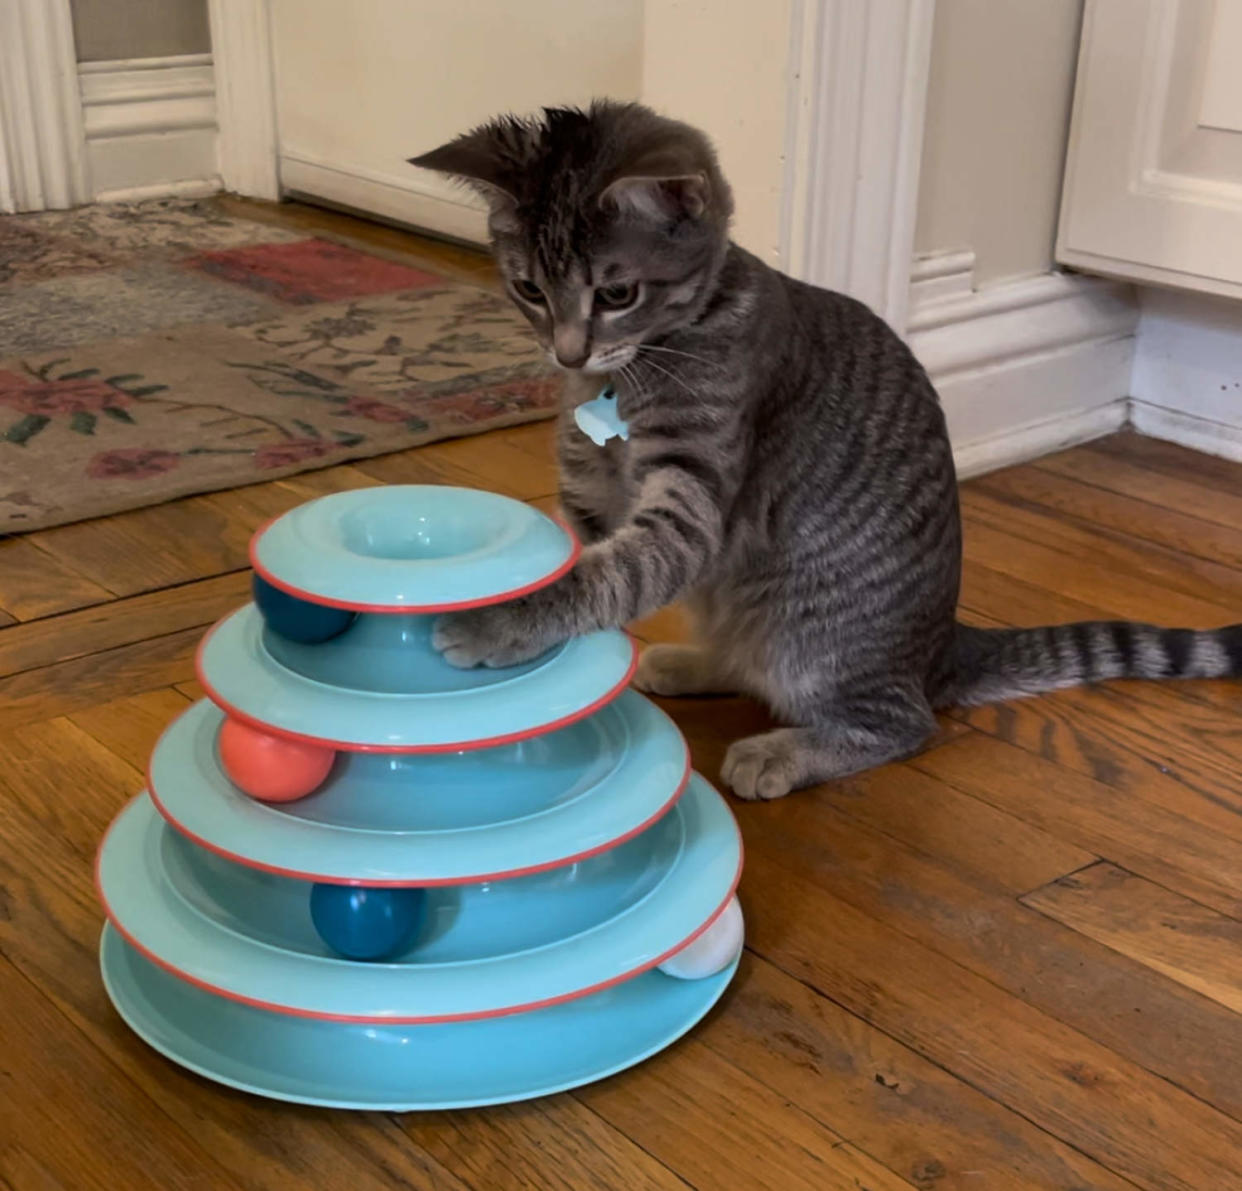 Cat playing with Catstages Chase Meowtain Interactive 4-Tier Cat Track Toy (Courtesy Zoe Malin)